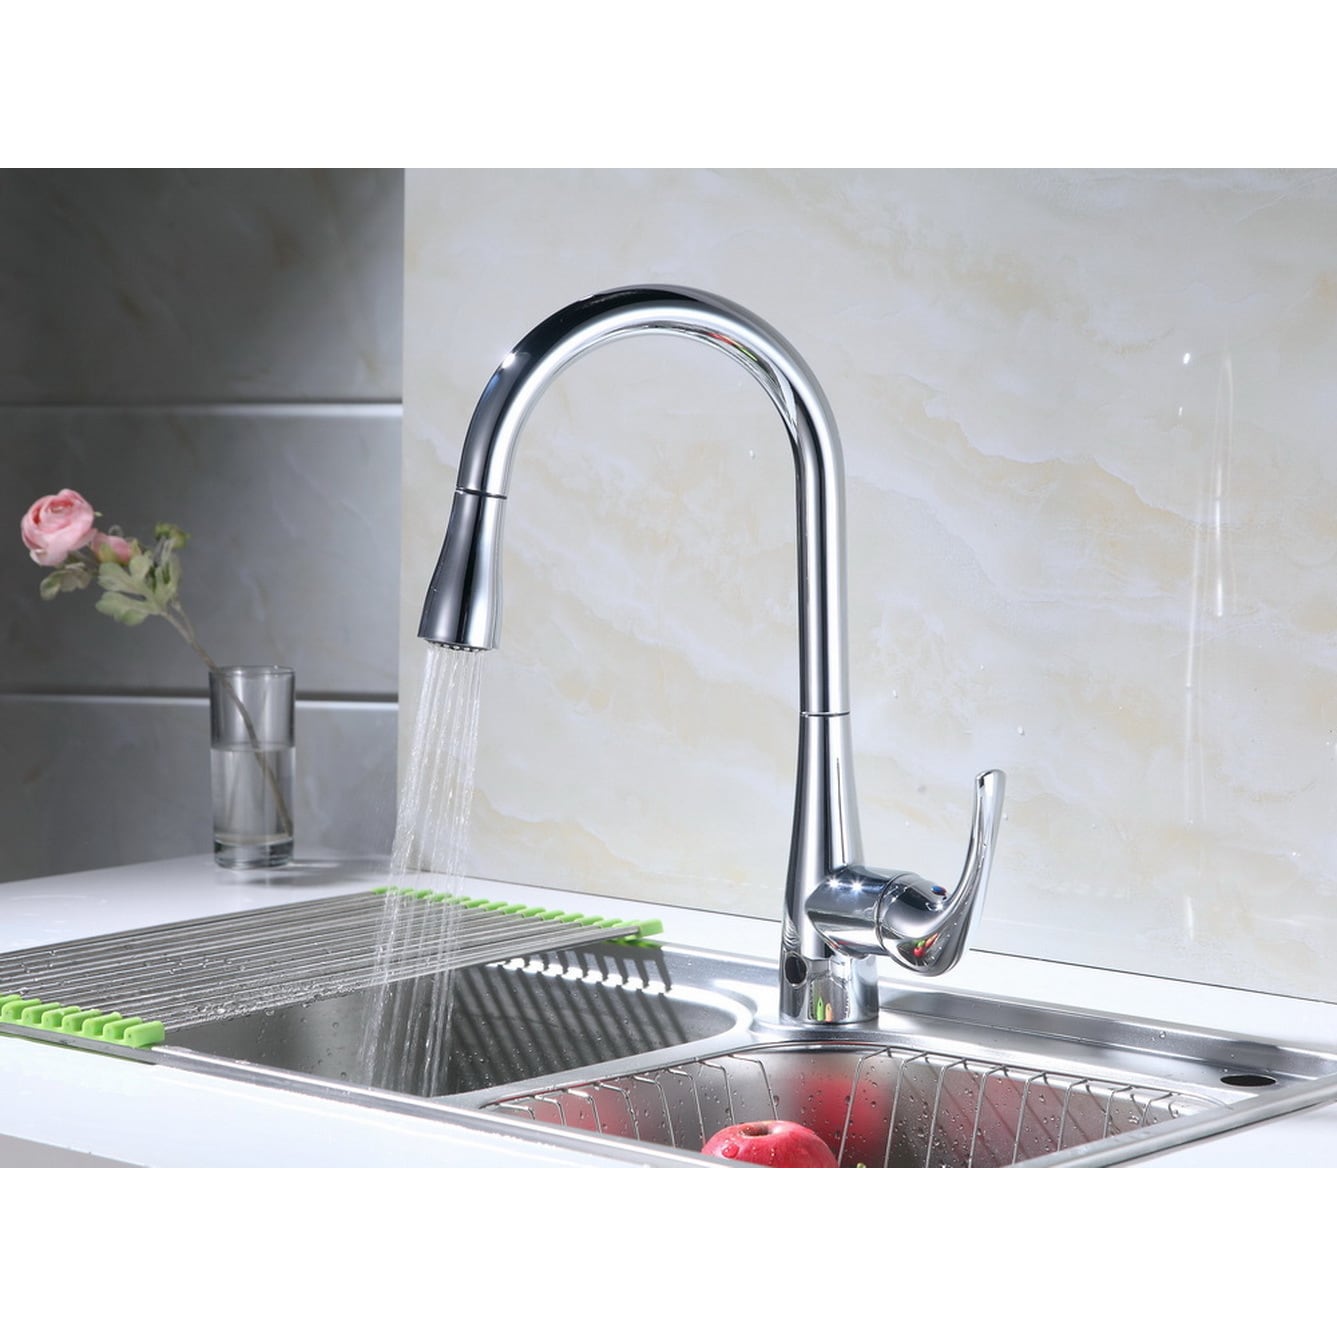 RUNFINE Single-Handle Pull-Down Sprayer With Hands-Free Kitchen Faucet Chrome - image 4 of 5